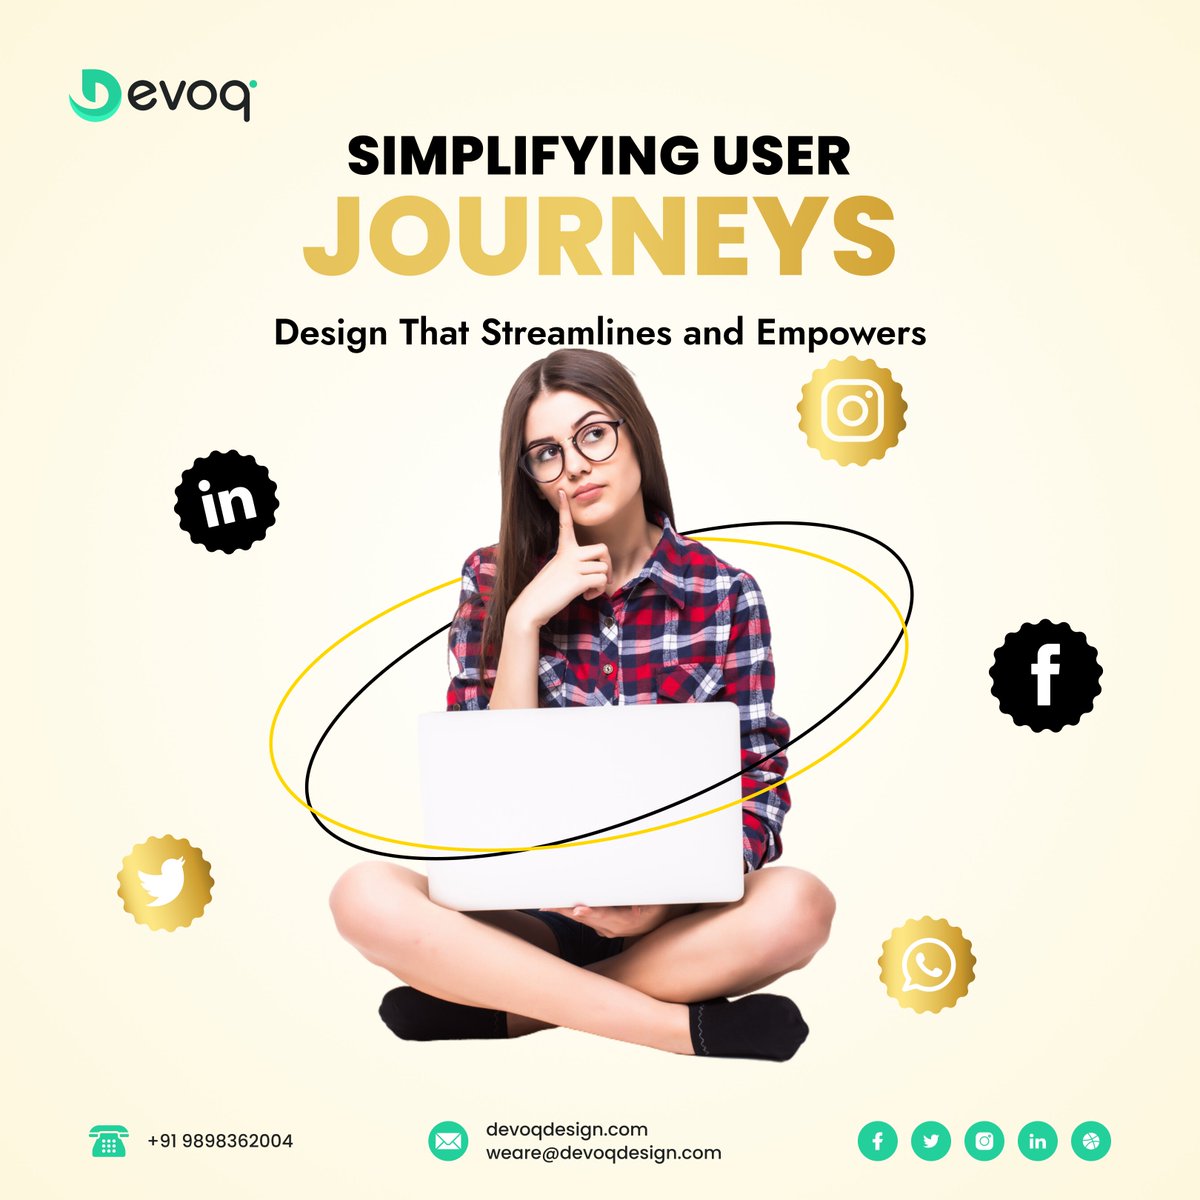 We don't design user journeys, we build user highways straight to happyland. 😊

Visit our website for more details : devoqdesign.com  

Email Us : sales@devoqdesign.com 

#UIUX #UXUI #UIUXDesign #UXUIDesign #UserExperience #experiencematters #uiuxagency #WebSolutions